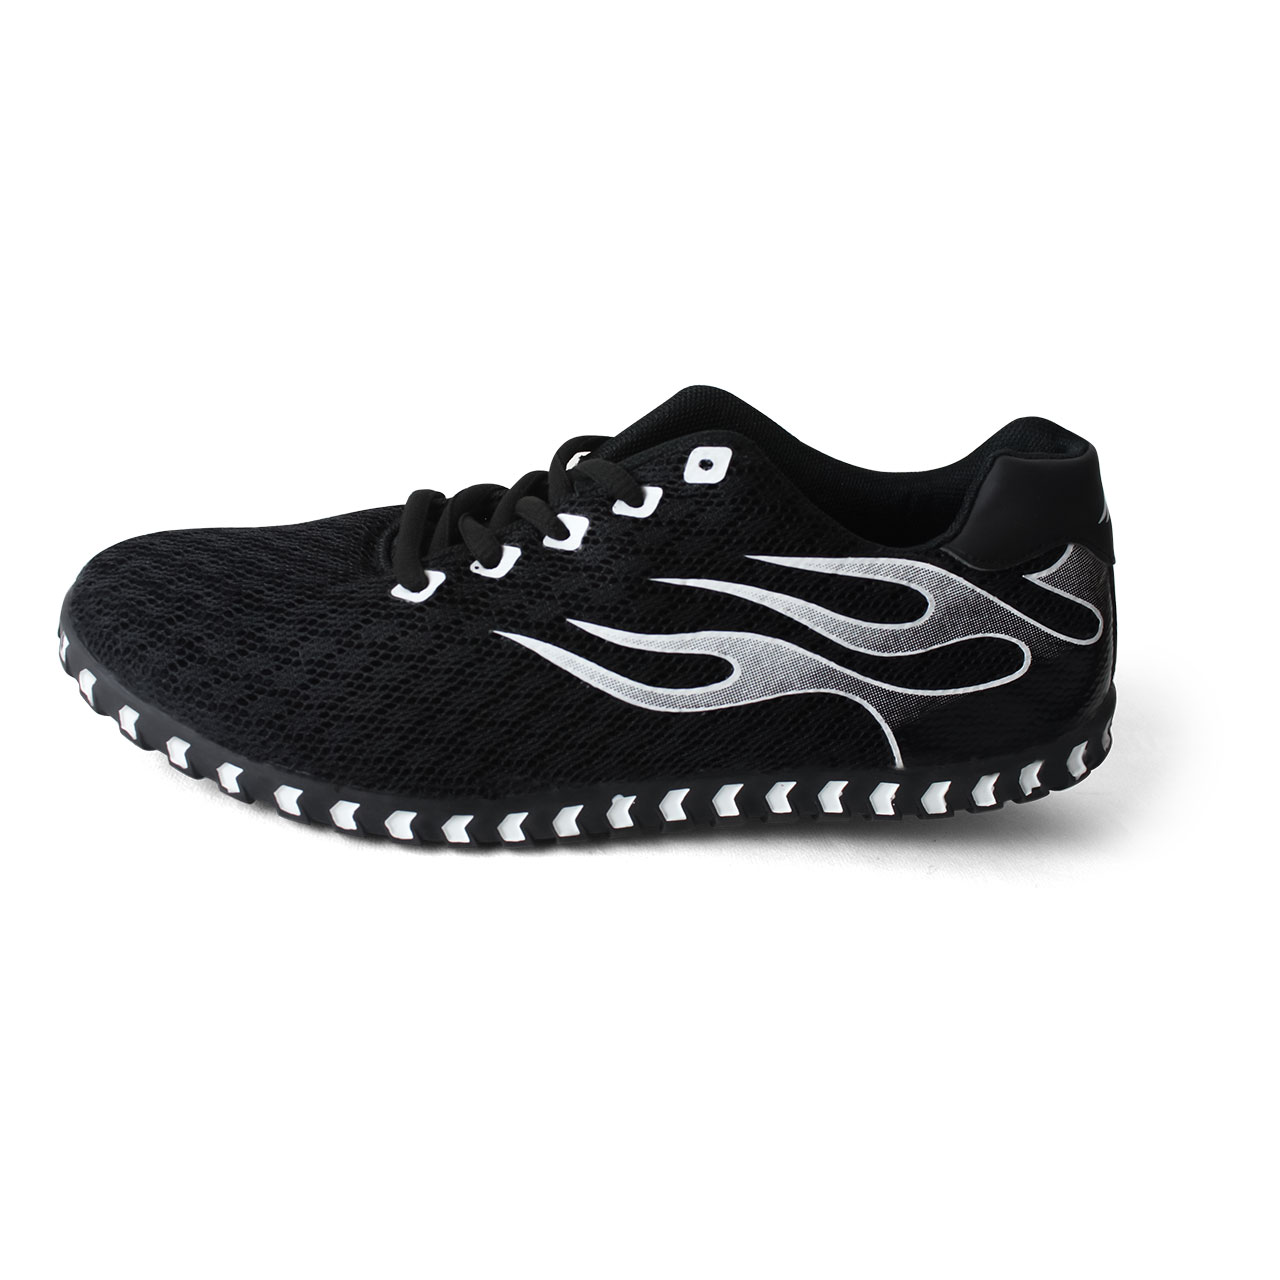 Fashion Casual Leisure Lace-Up Black Sports Shoes For Men